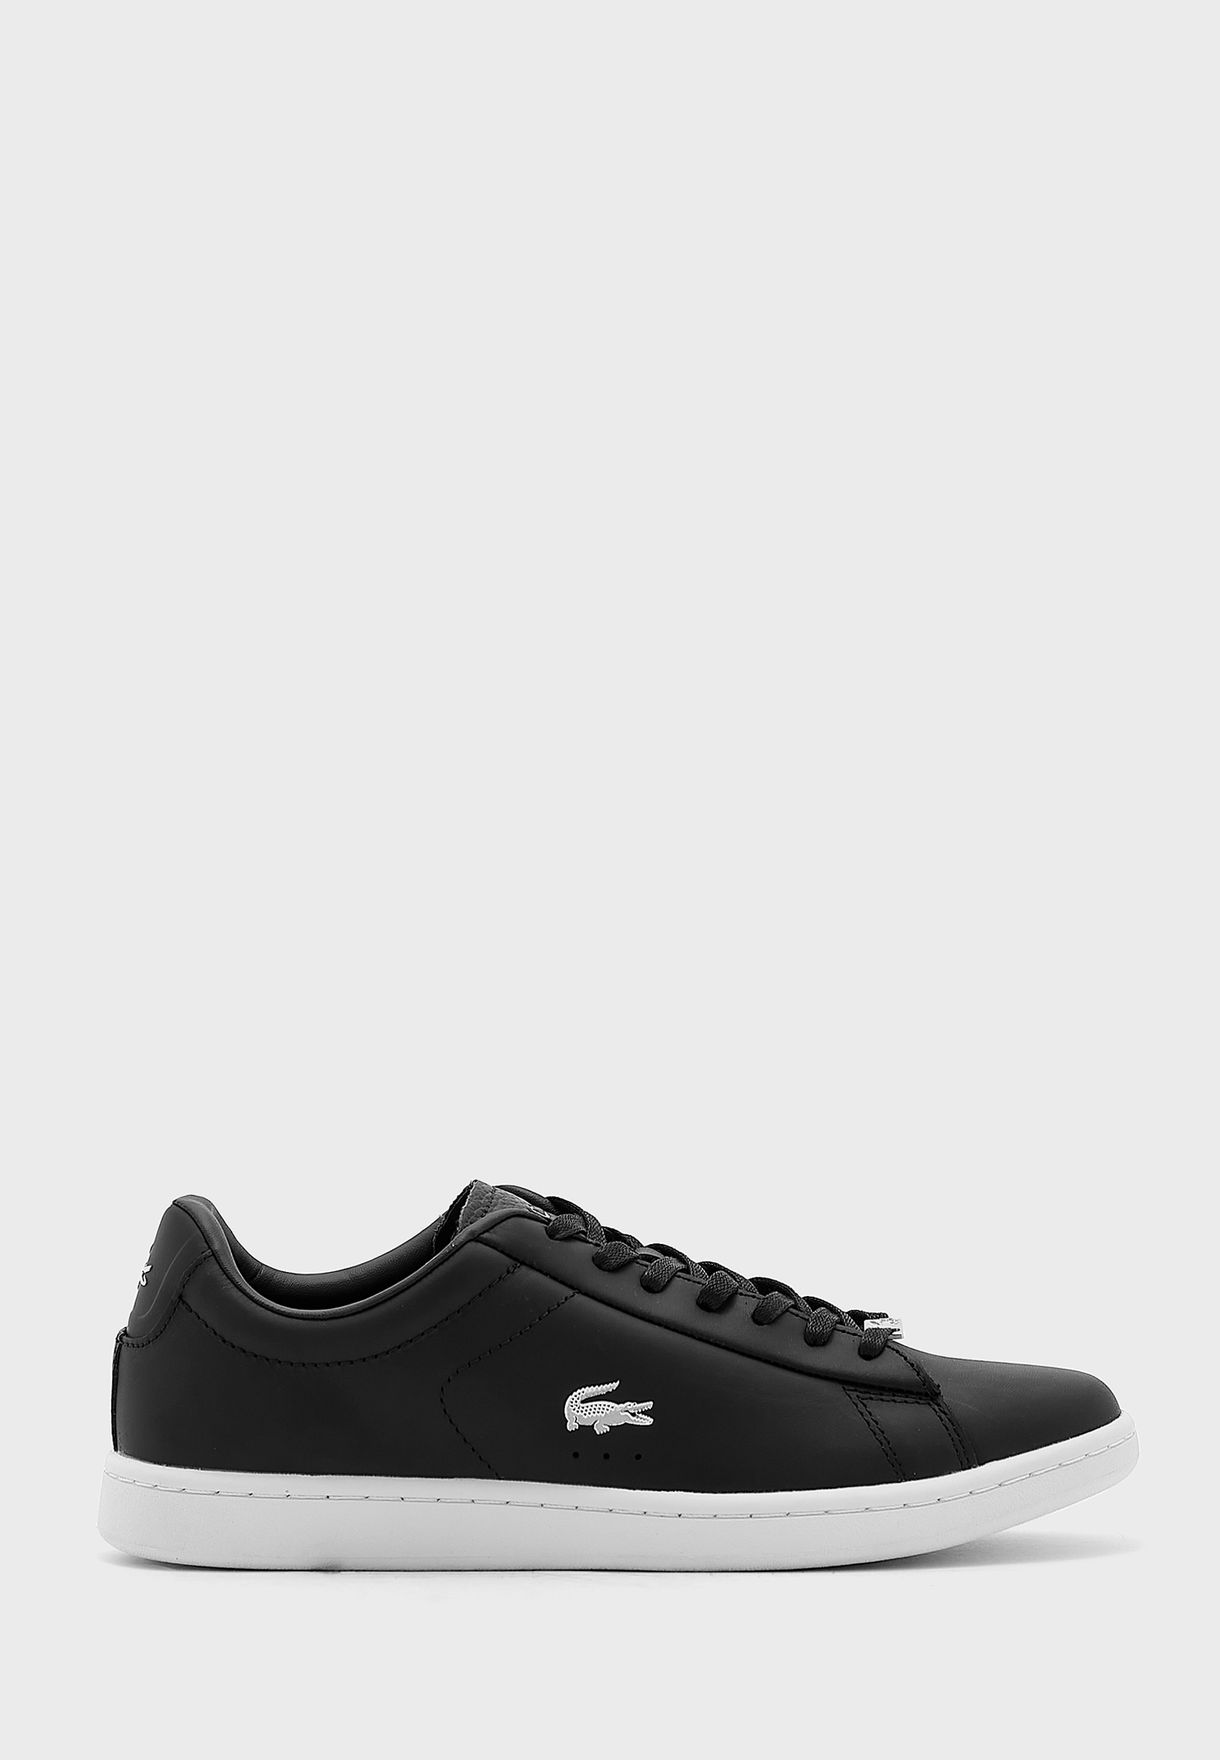 Carnaby Evo 0722 1 Sneakers